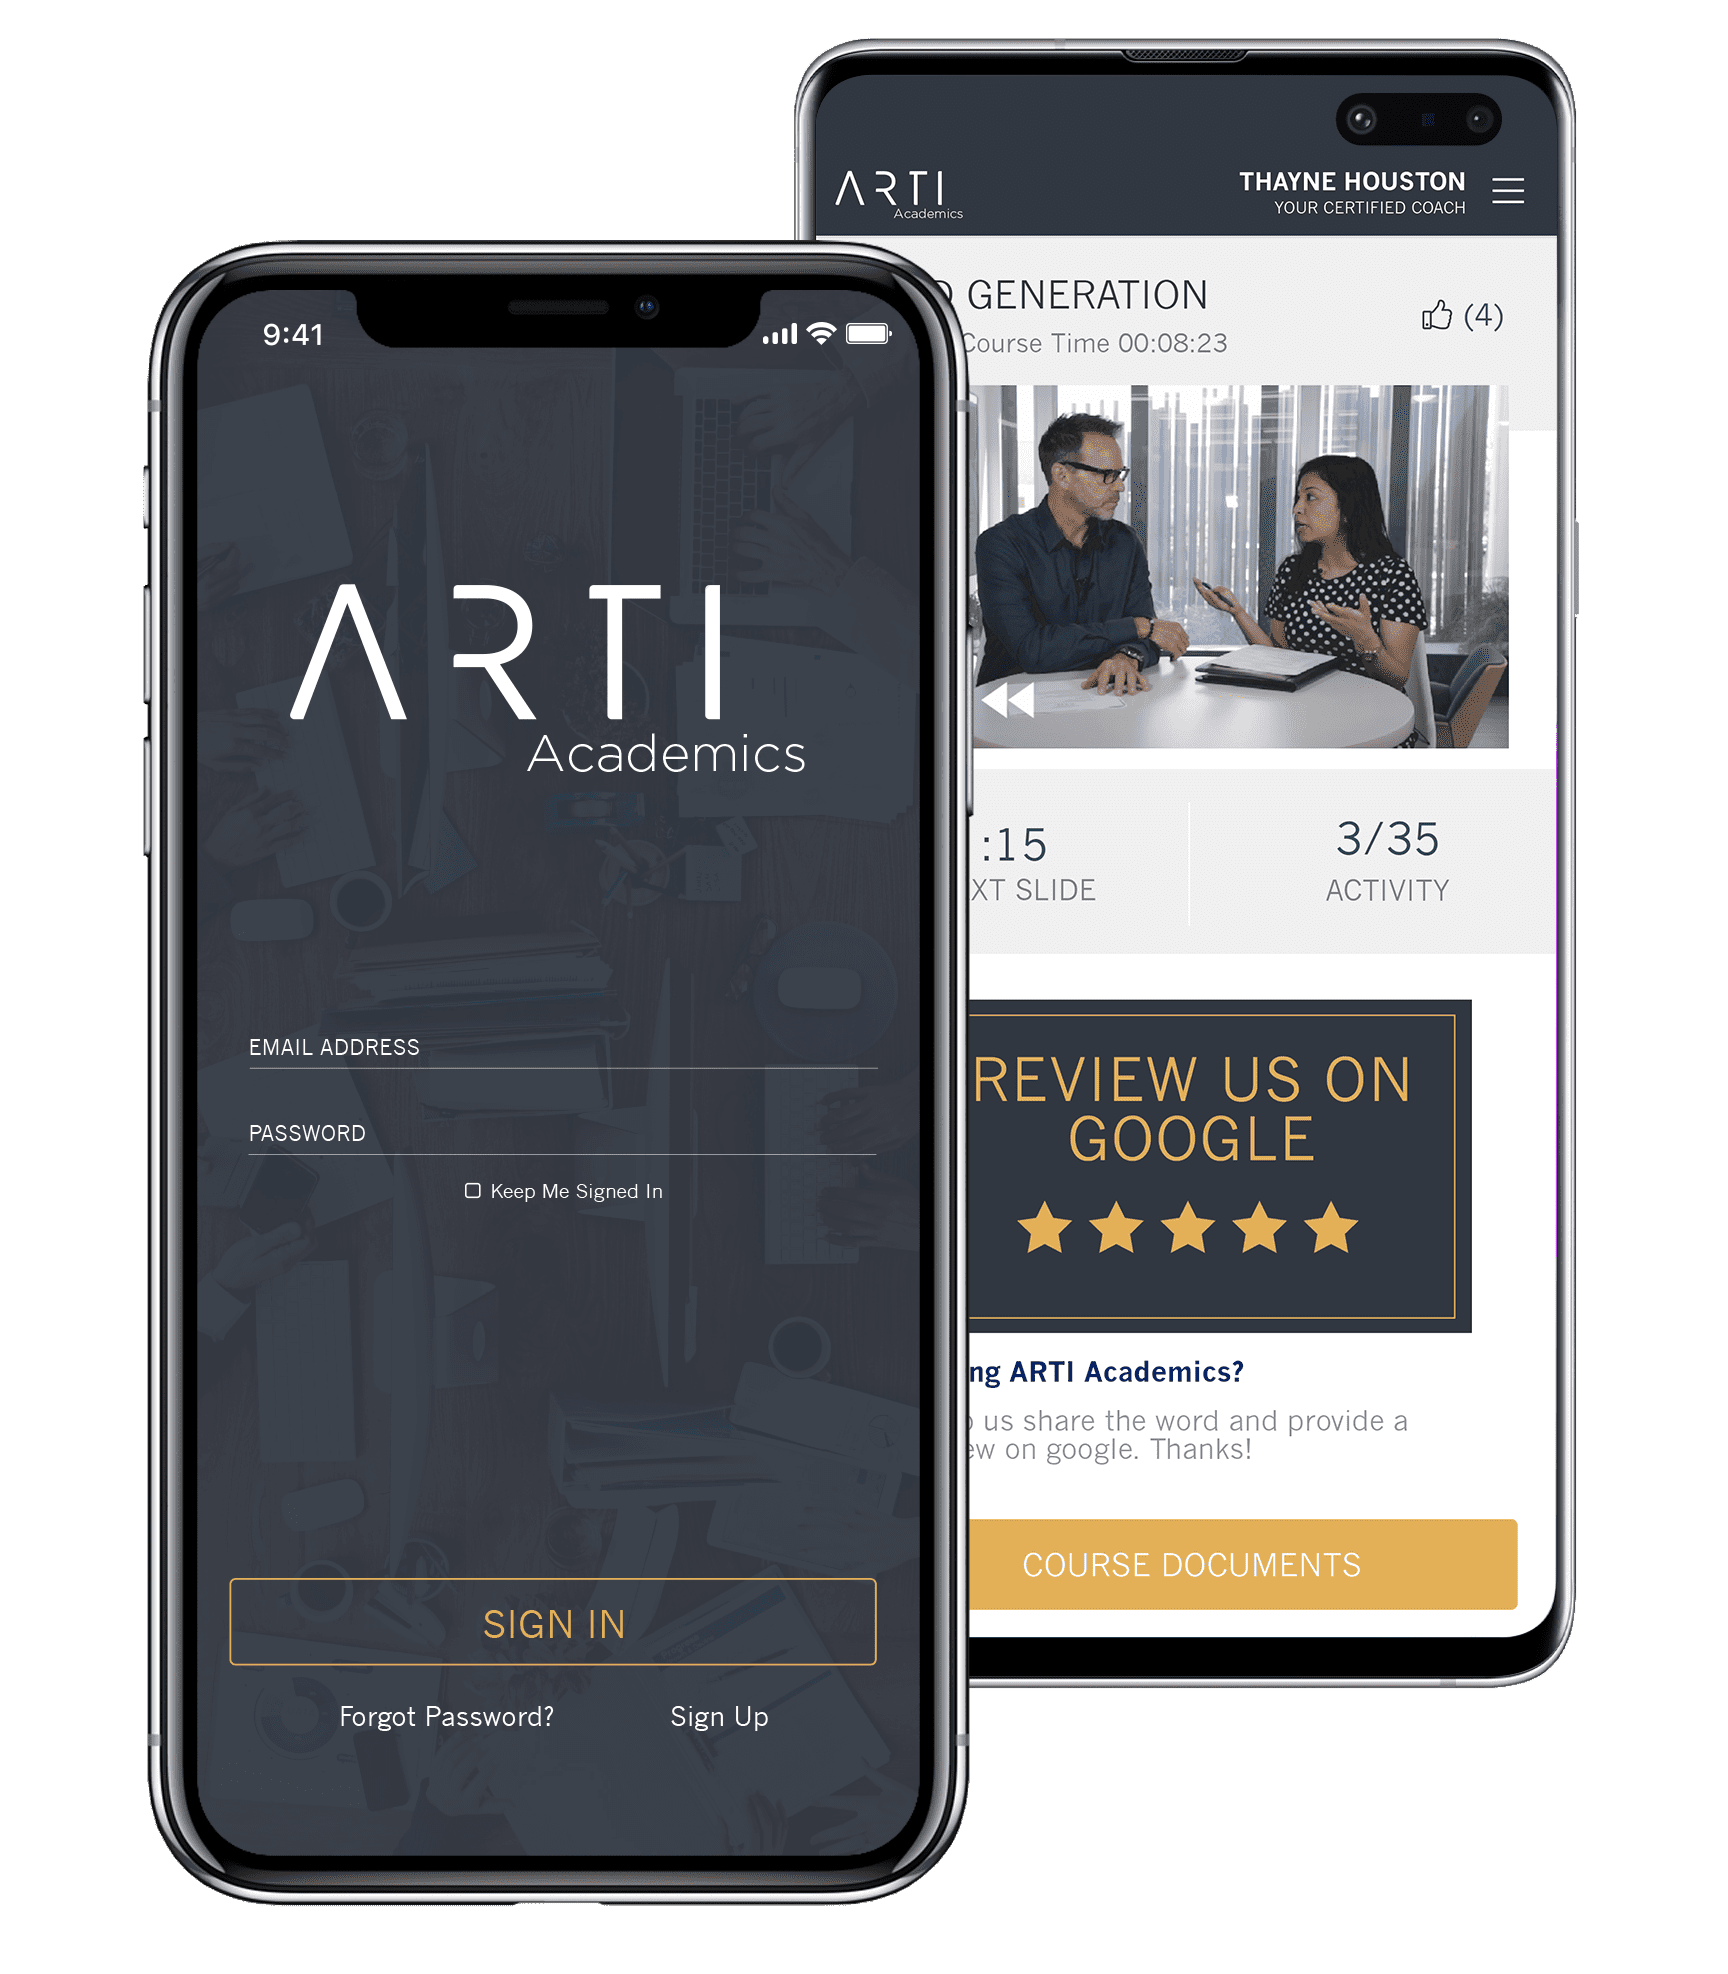 Iphone and Android displaying the ARTI Academic app